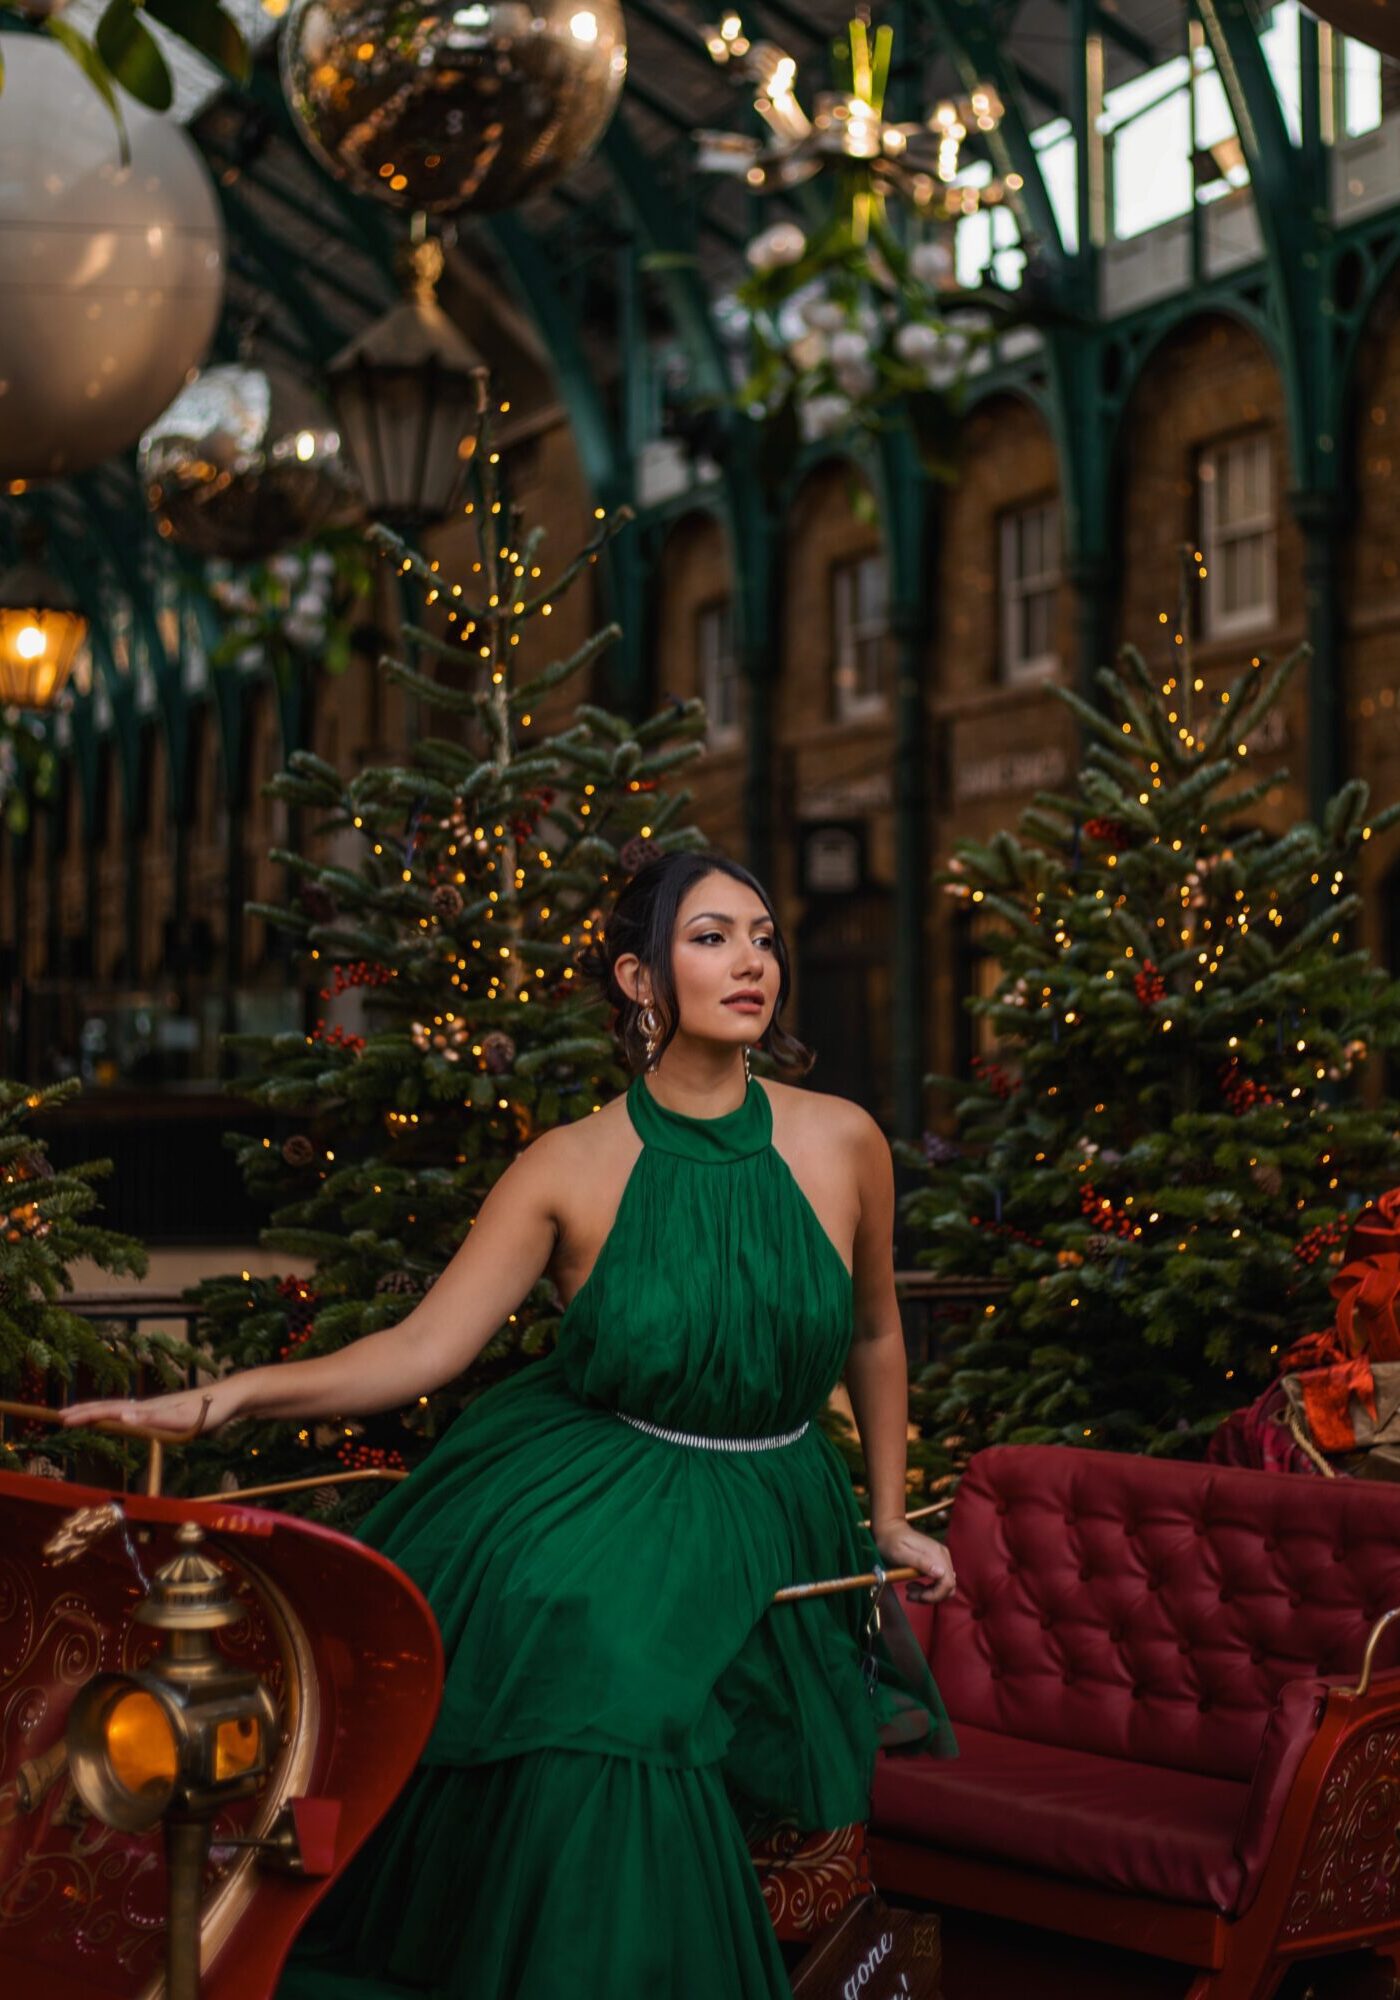 The Most Instagrammable Christmas Locations in London | Anoushka Probyn